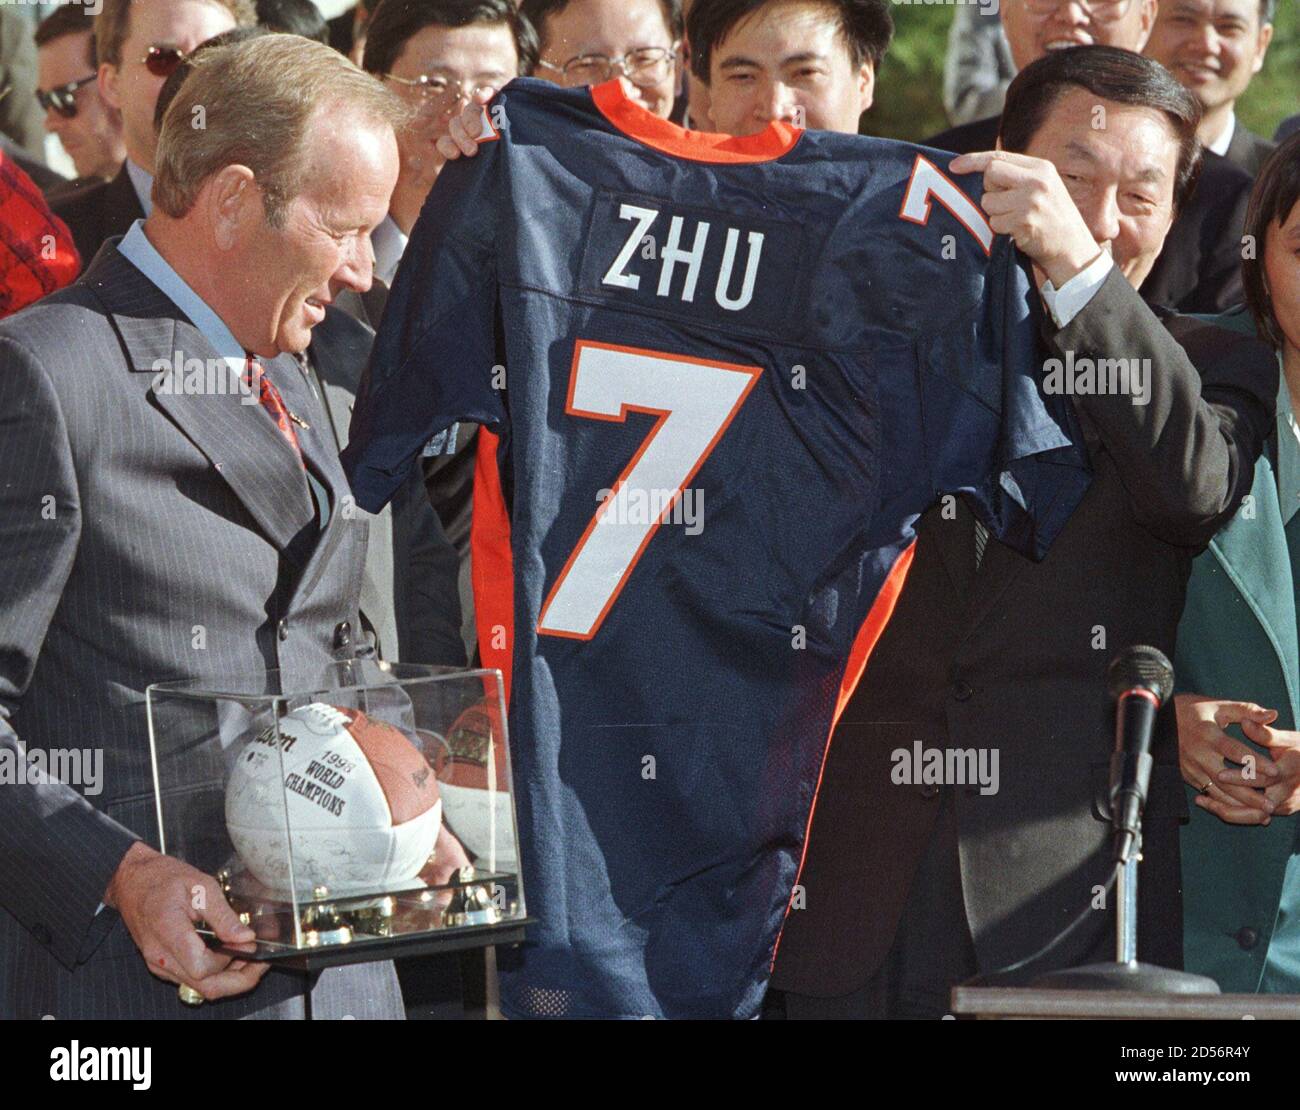 Chinese Premier Zhu Rongji (R) shows off a football jersey with his name on  it, but Denver Broncos quarterback John Elway's number, at the Broncos  headquarters facility in Englewood, Colorado April 10